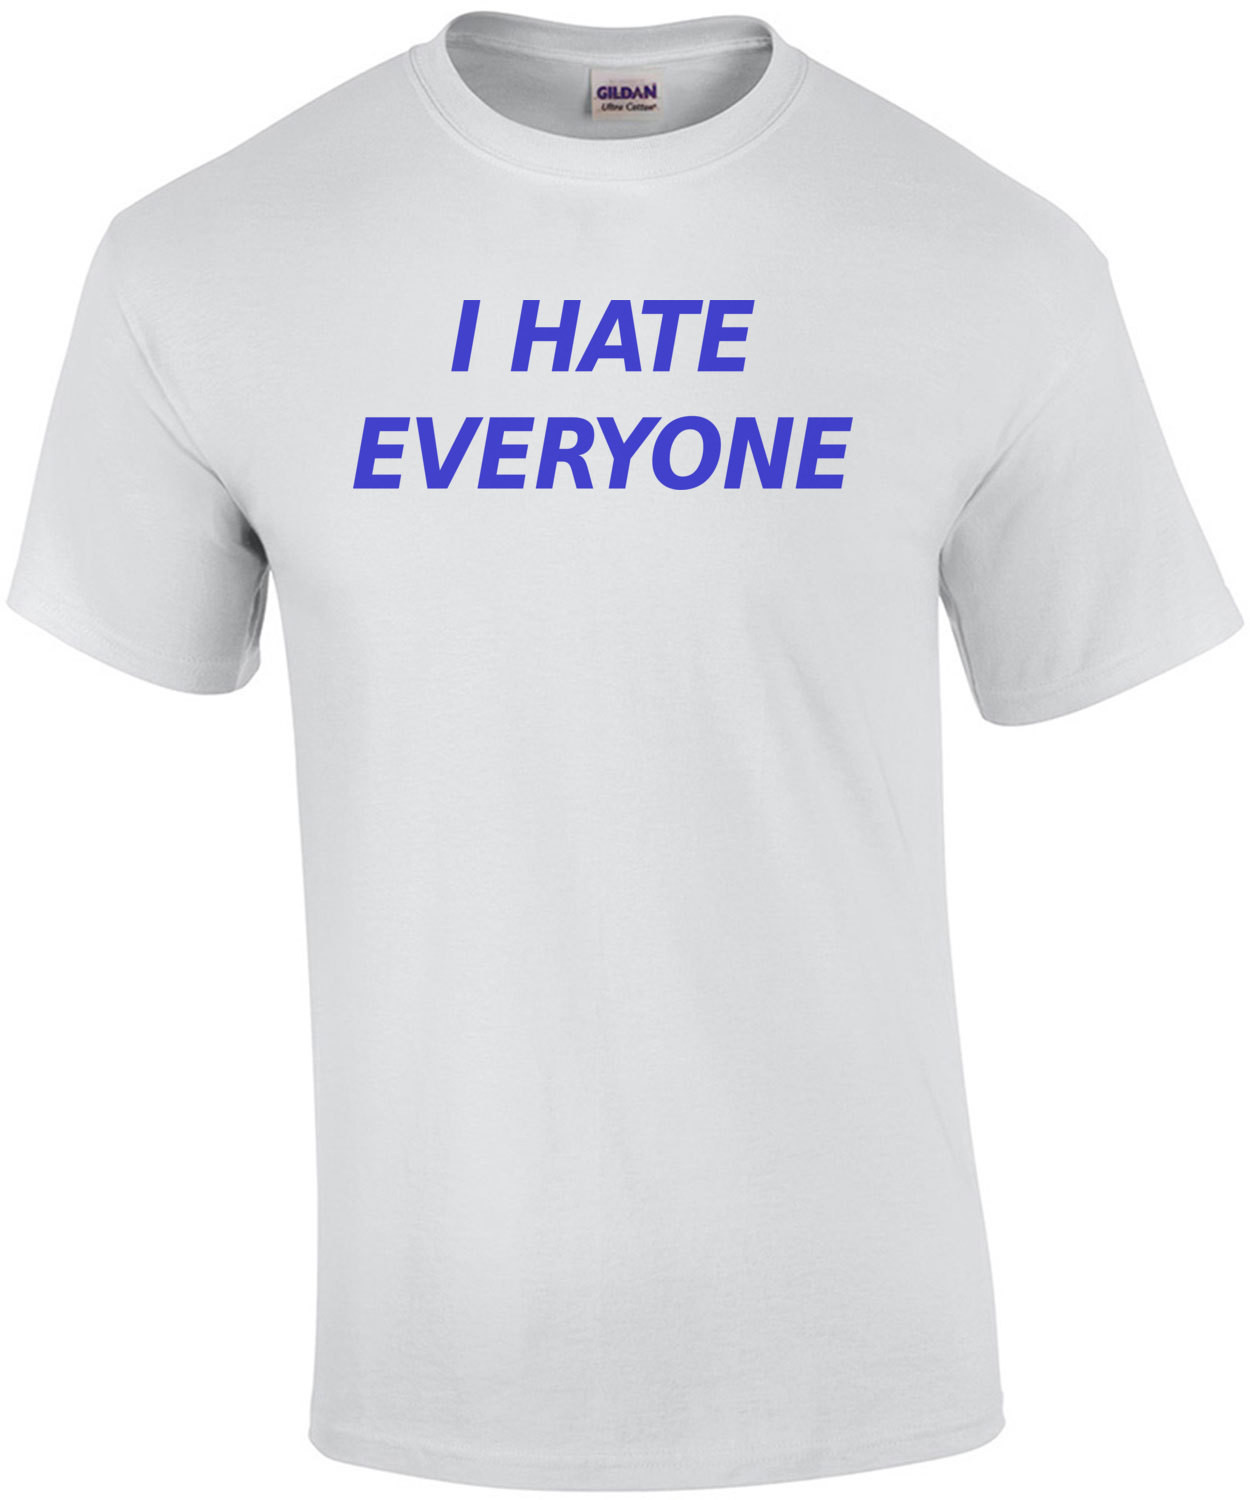 I hate everyone - funny t-shirt